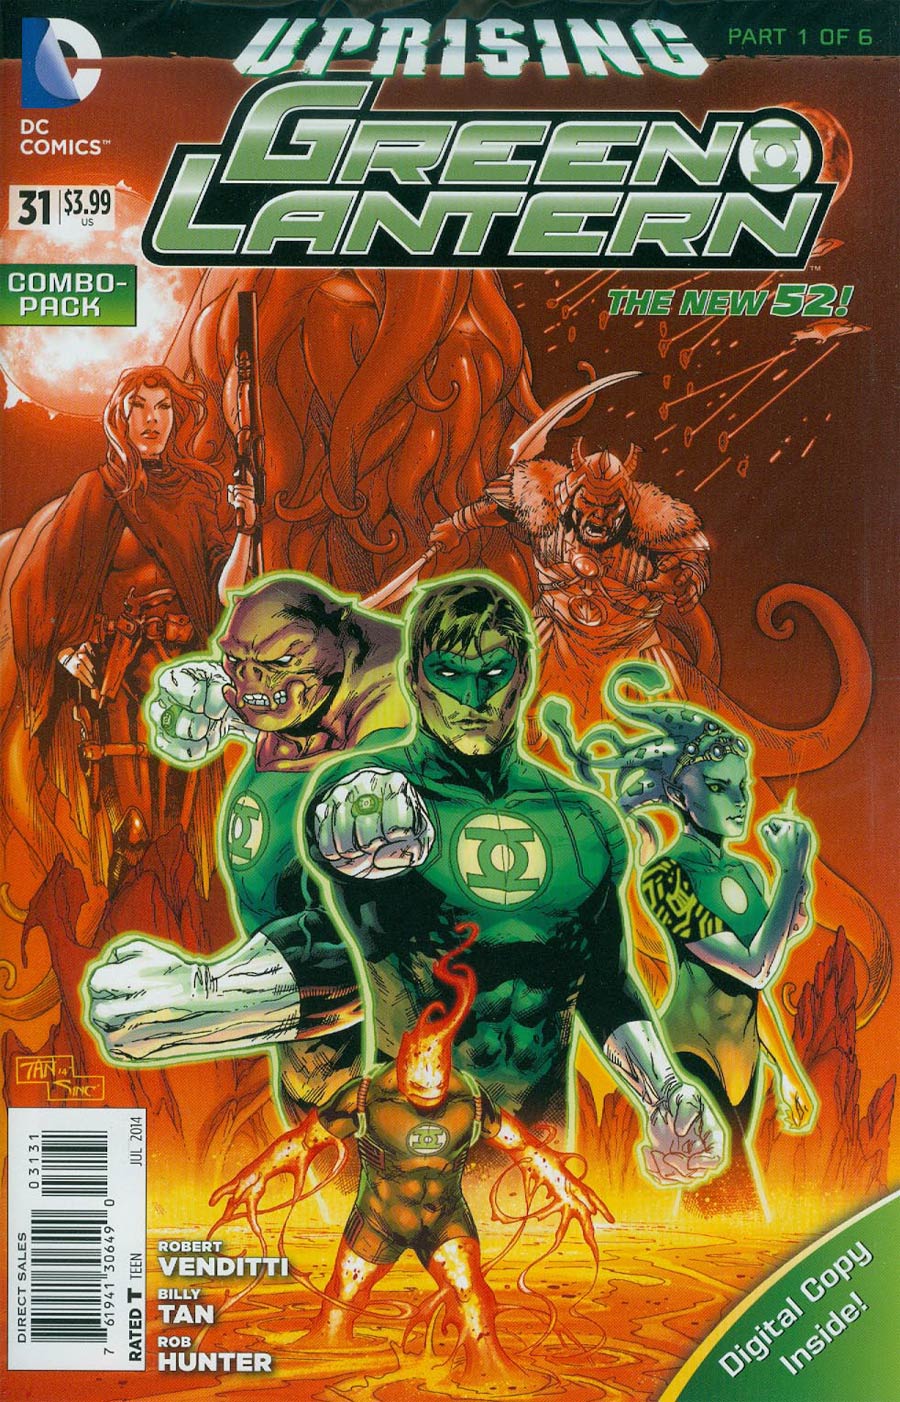 Green Lantern Vol 5 #31 Cover B Combo Pack With Polybag (Uprising Part 1)